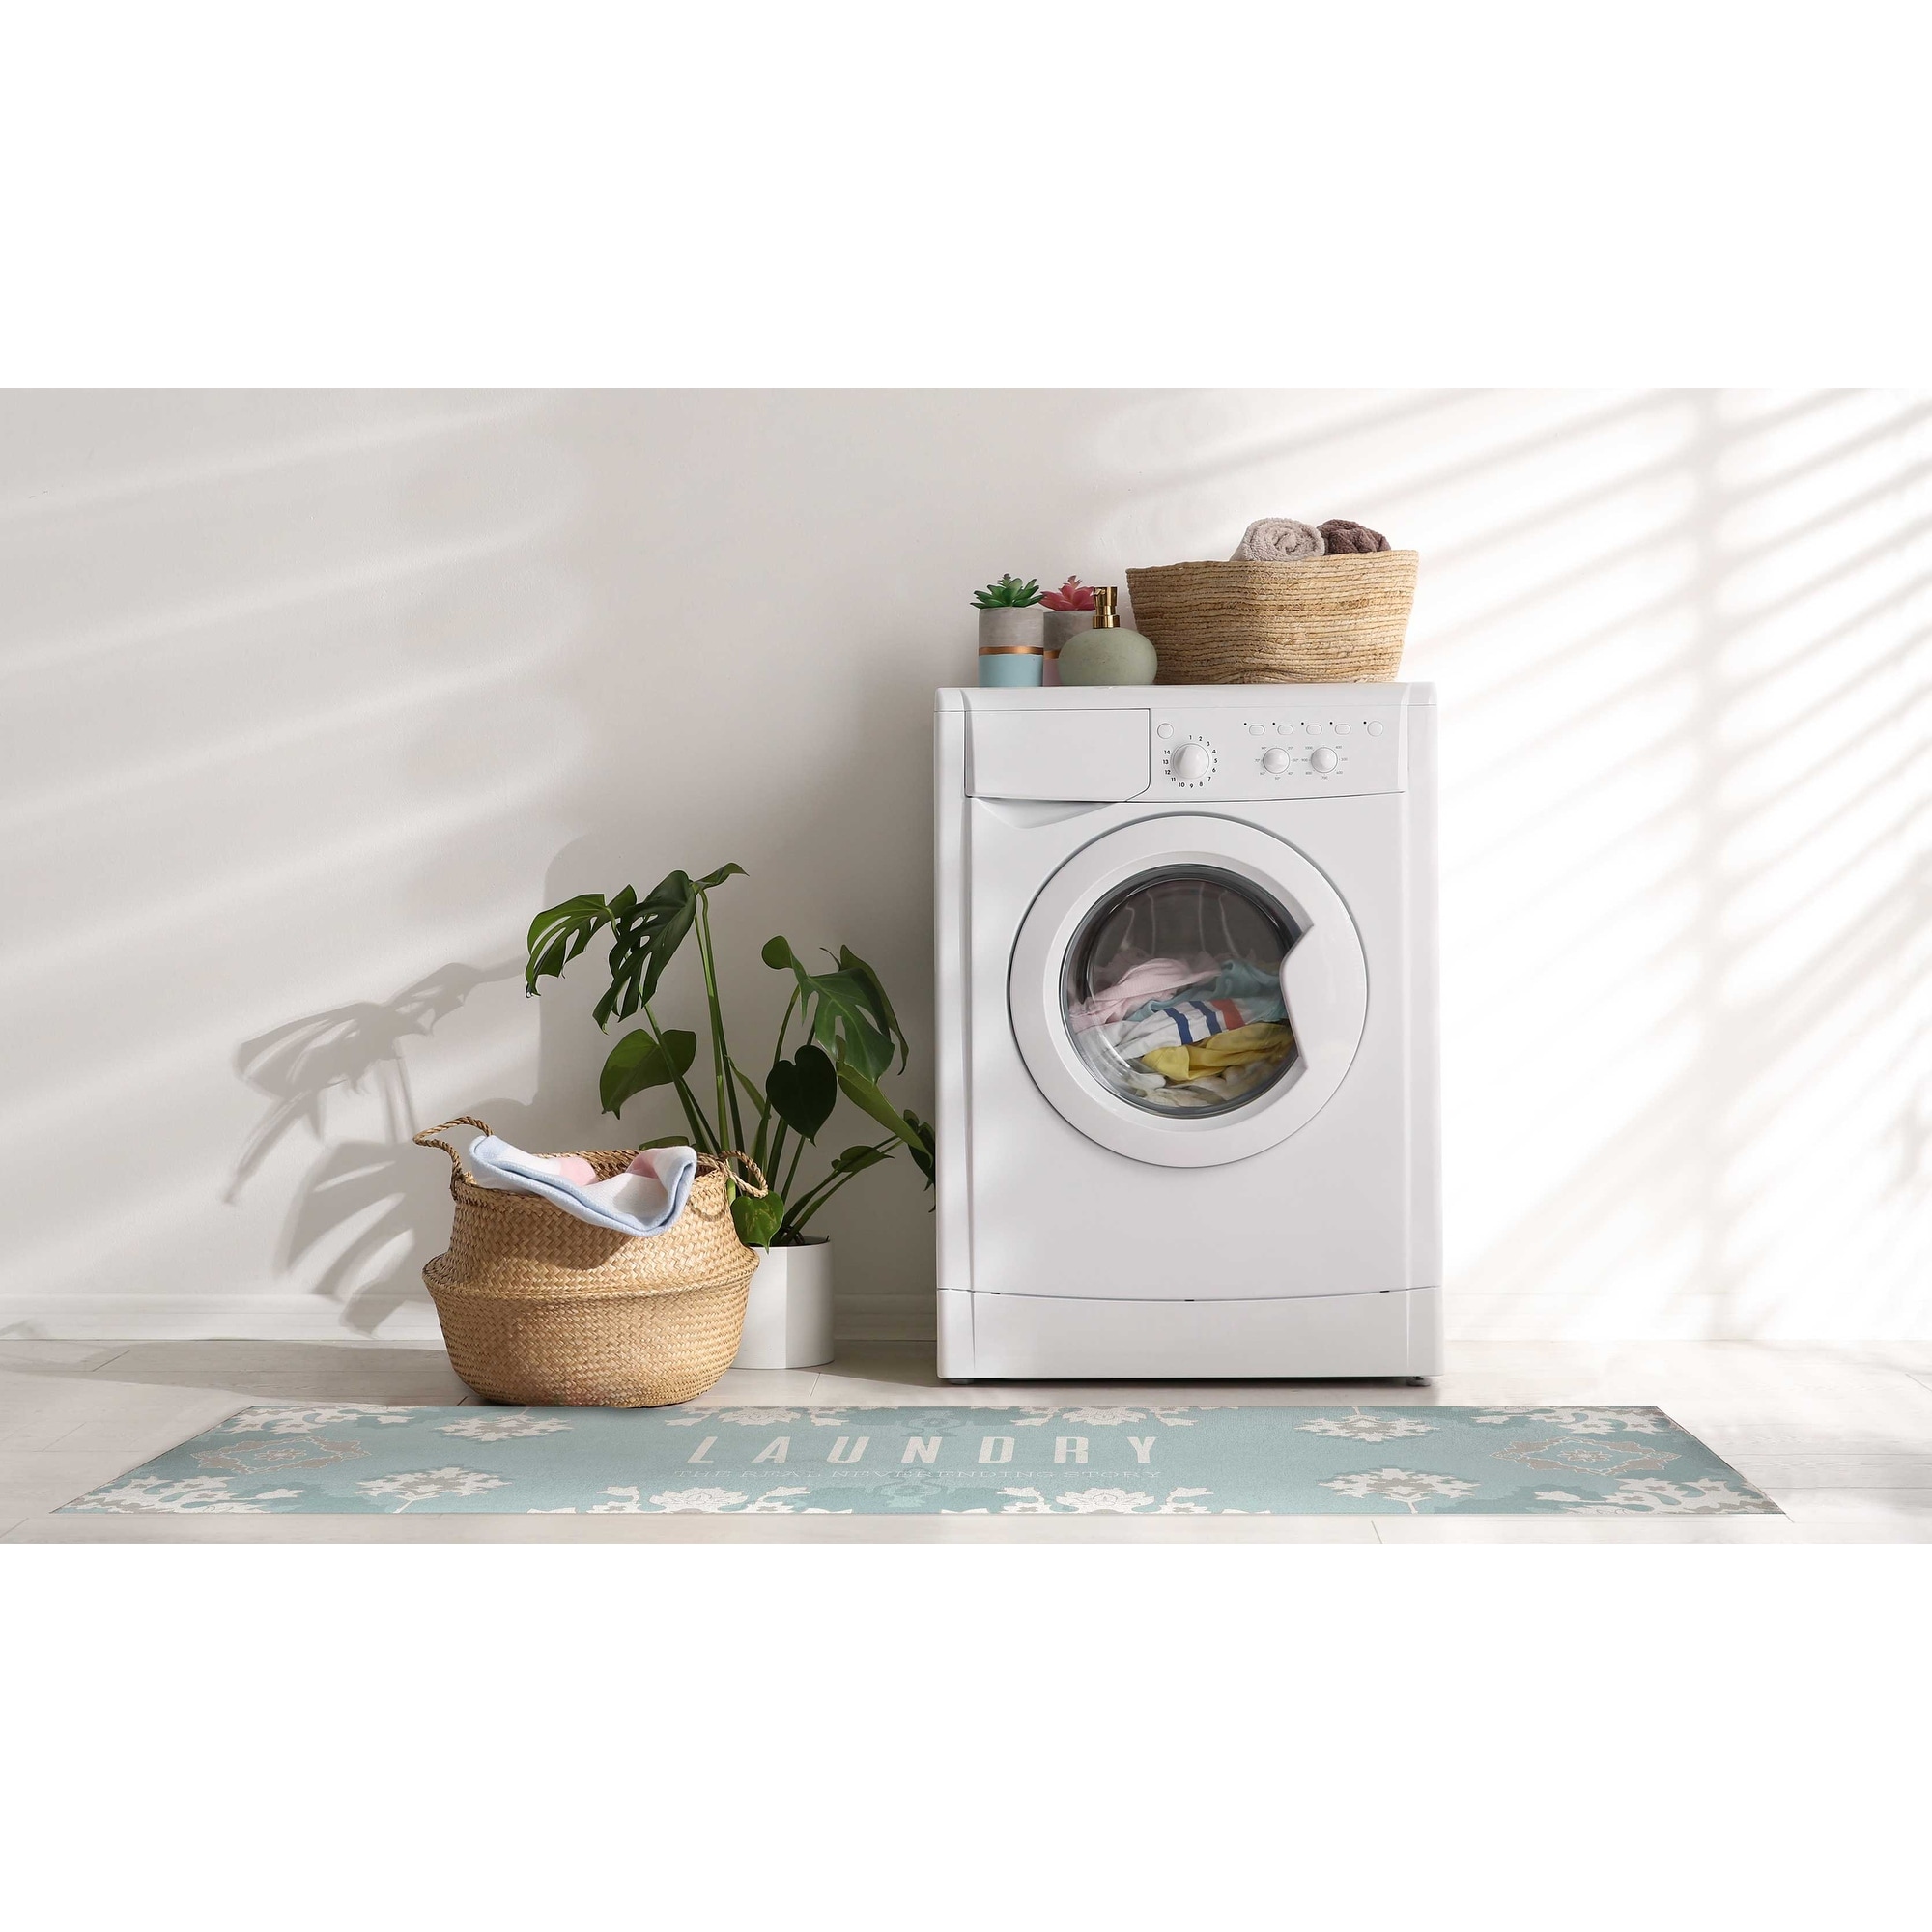 https://ak1.ostkcdn.com/images/products/is/images/direct/0172c9ab615d9bb3801dbb35c783e4bcd186191b/NEVER-ENDING-STORY-Laundry-Room-Mat-Sky.jpg